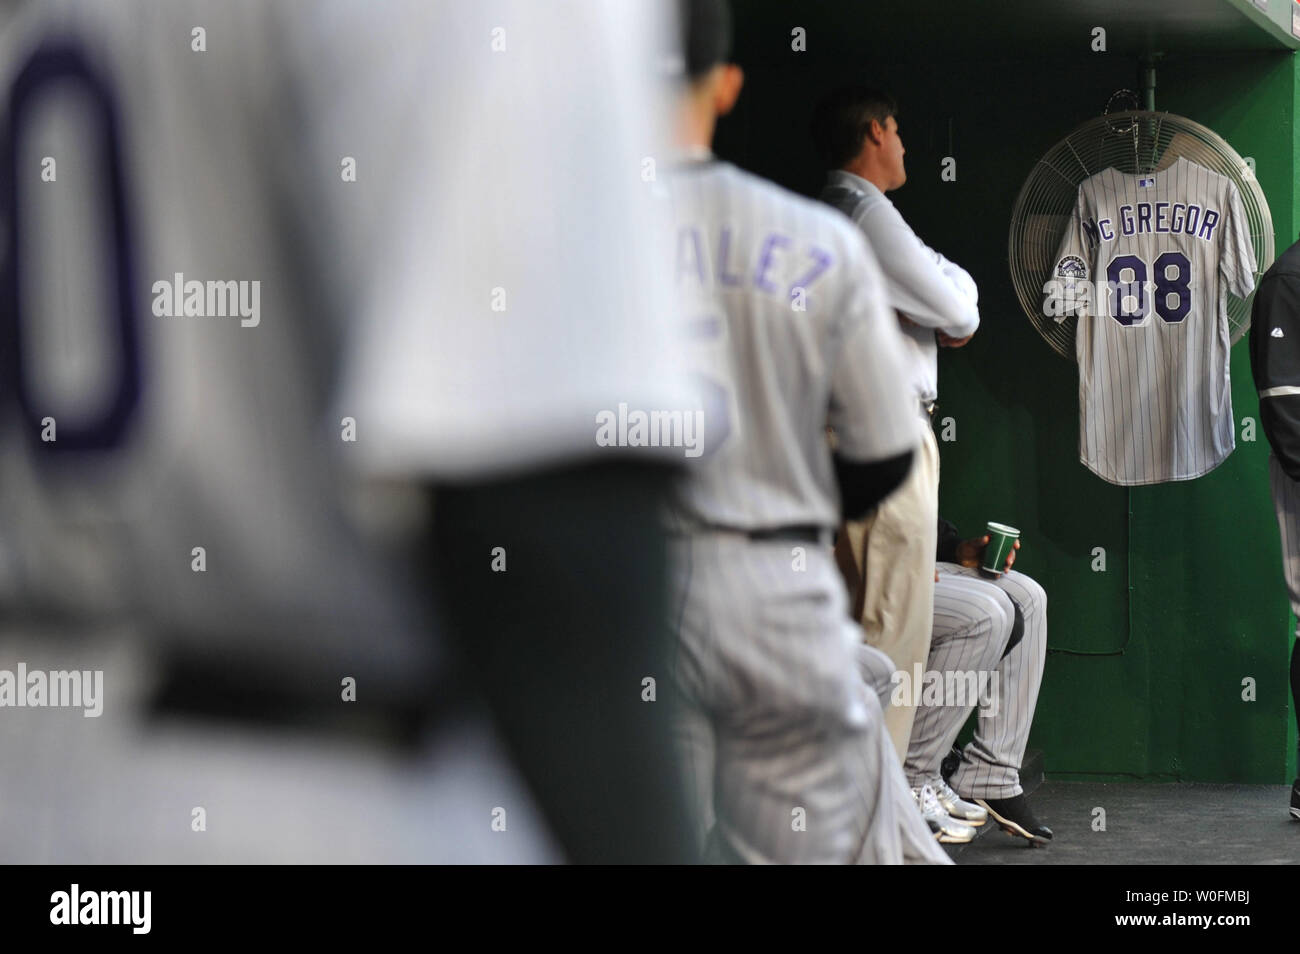 April 30, 2010; San Francisco, CA, USA; A Colorado Rockies jersey in honor  of Keli McGregor hangs in the Rockies dugout before the game against the  San Francisco Giants at AT&T Park.